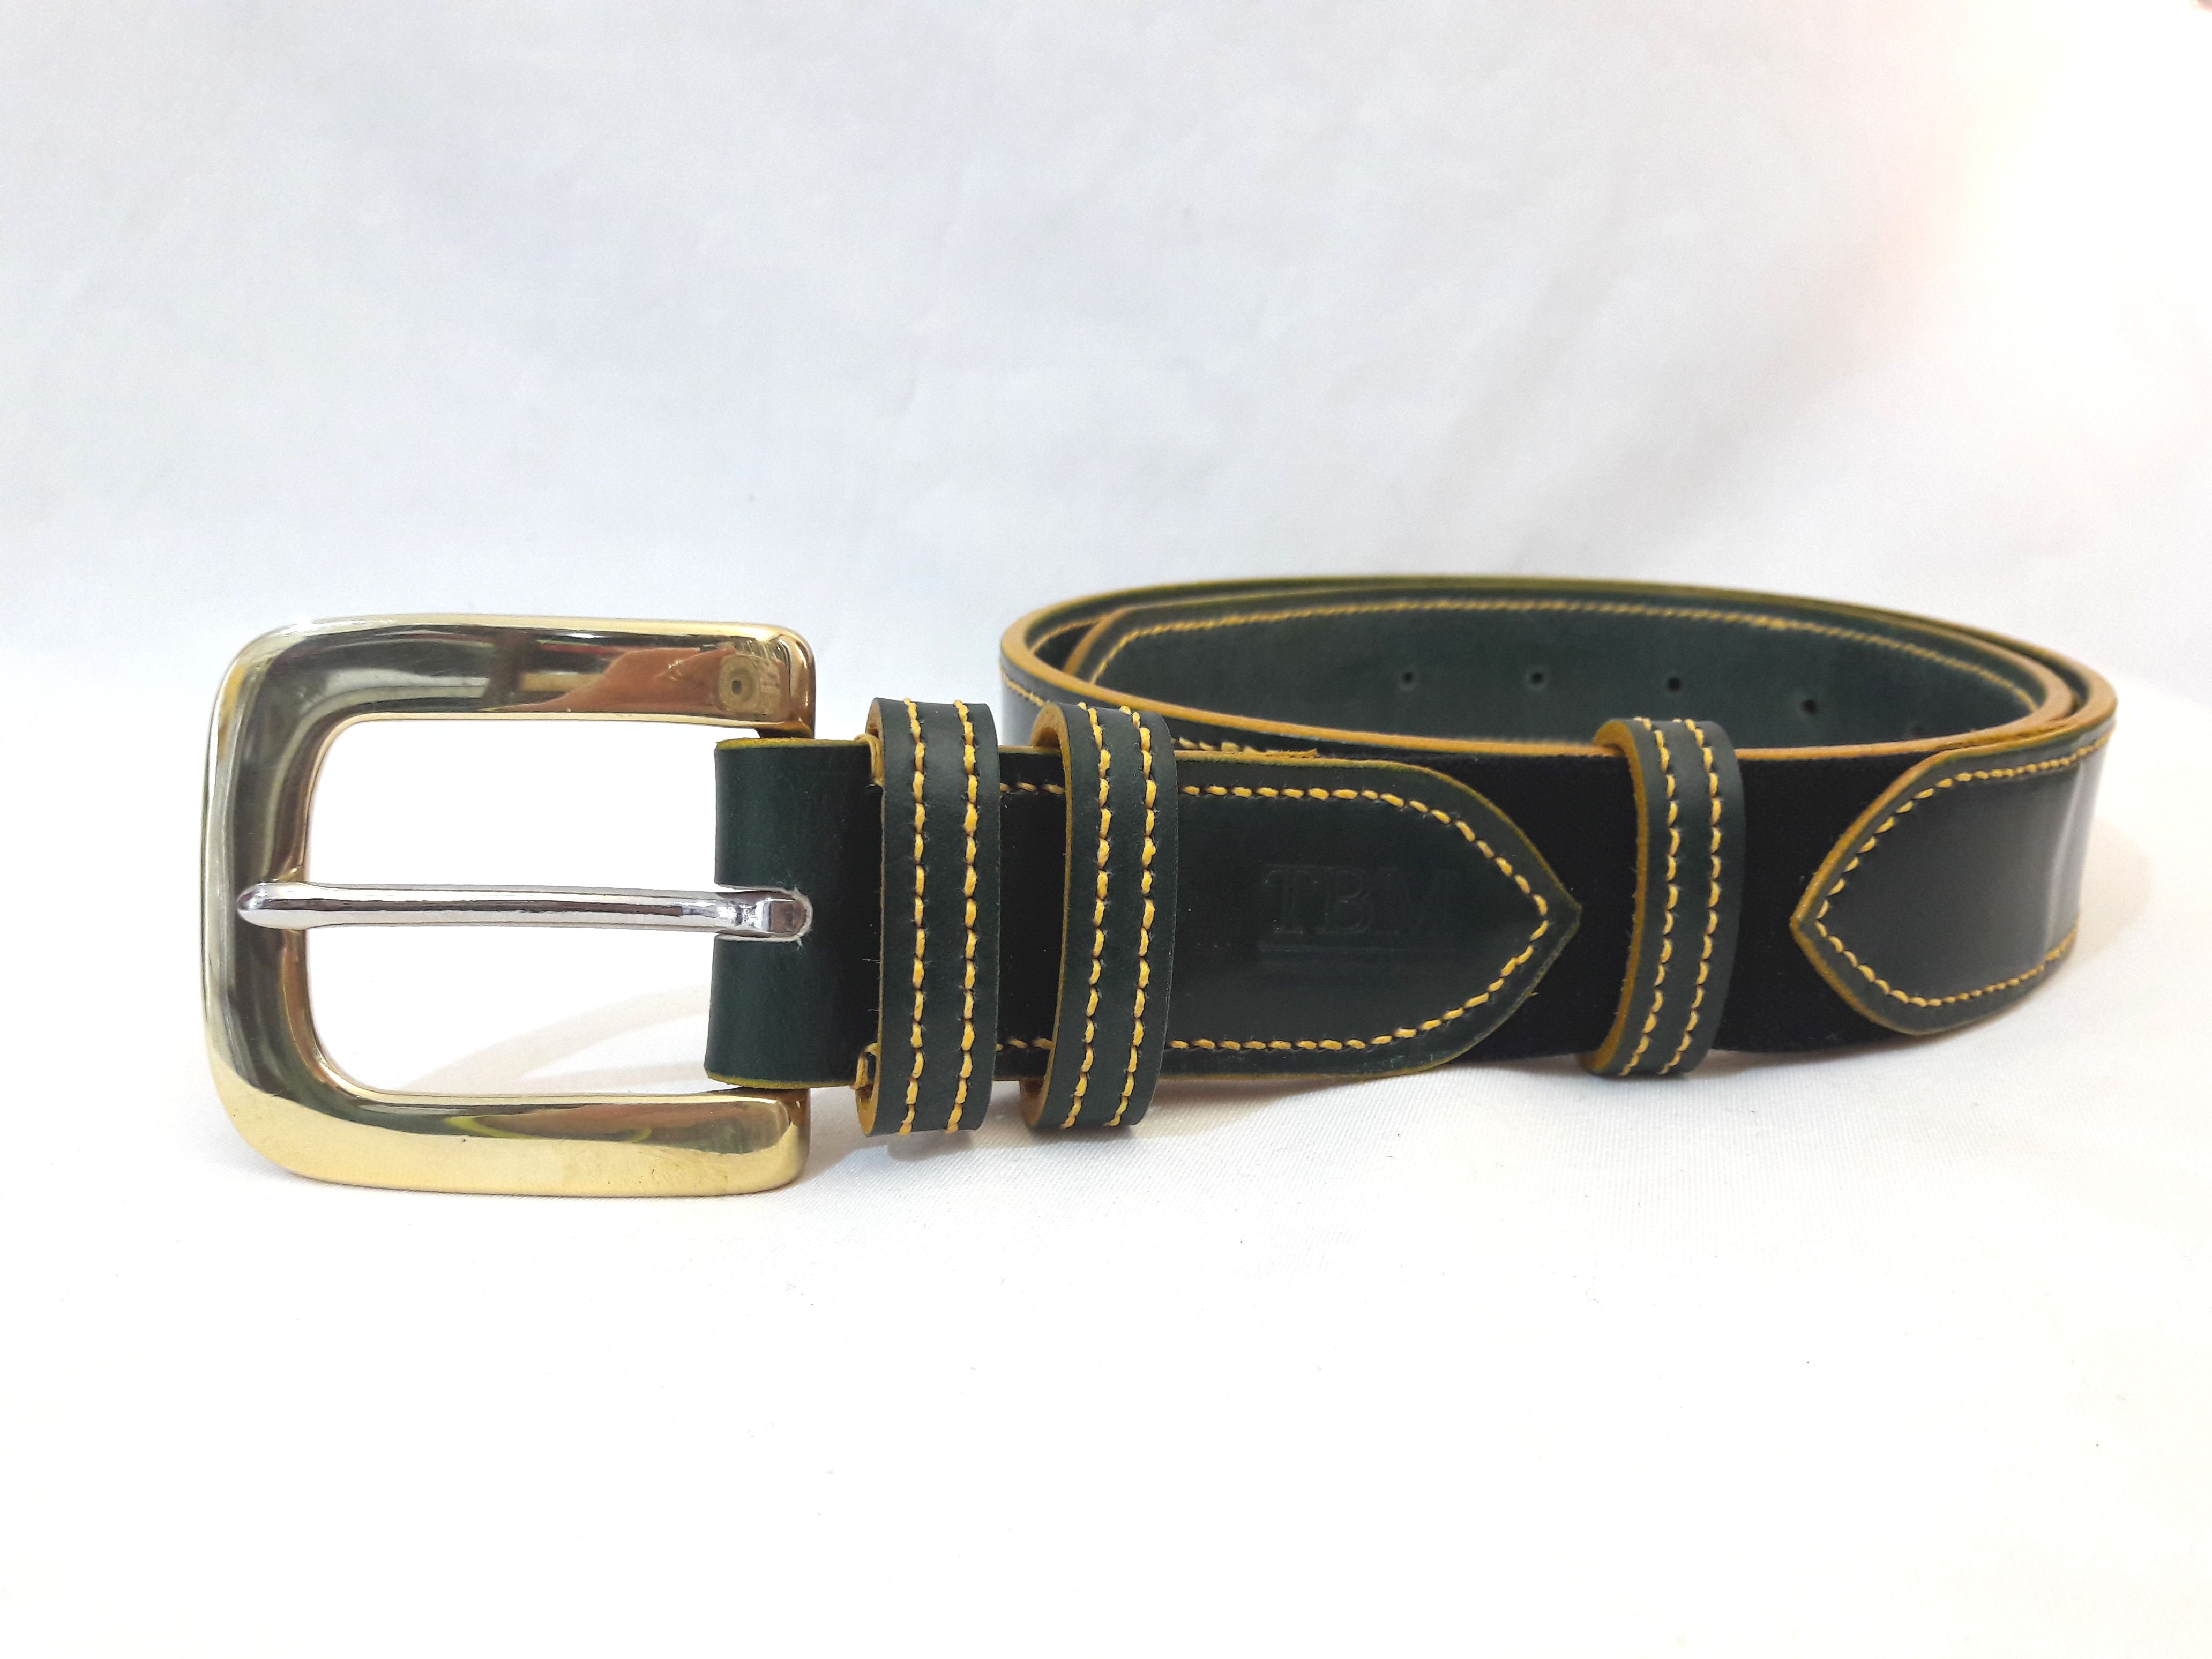 Dining Belts coming to the website!